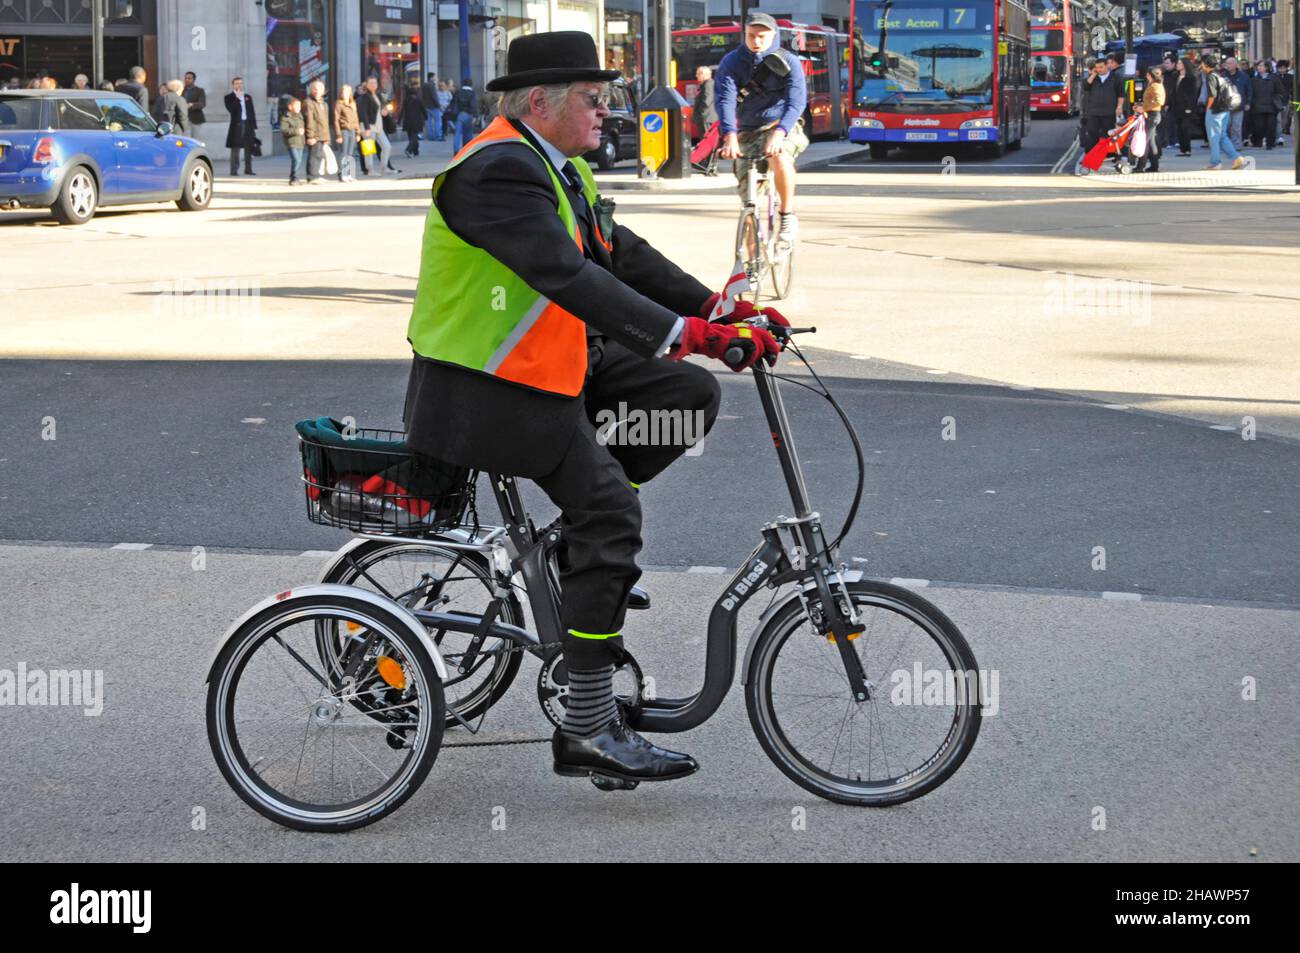 Side view city gent bowler hat wearing high visibility jacket & office suit riding Di Blasi tricycle at Oxford Circus road junction London England UK Stock Photo